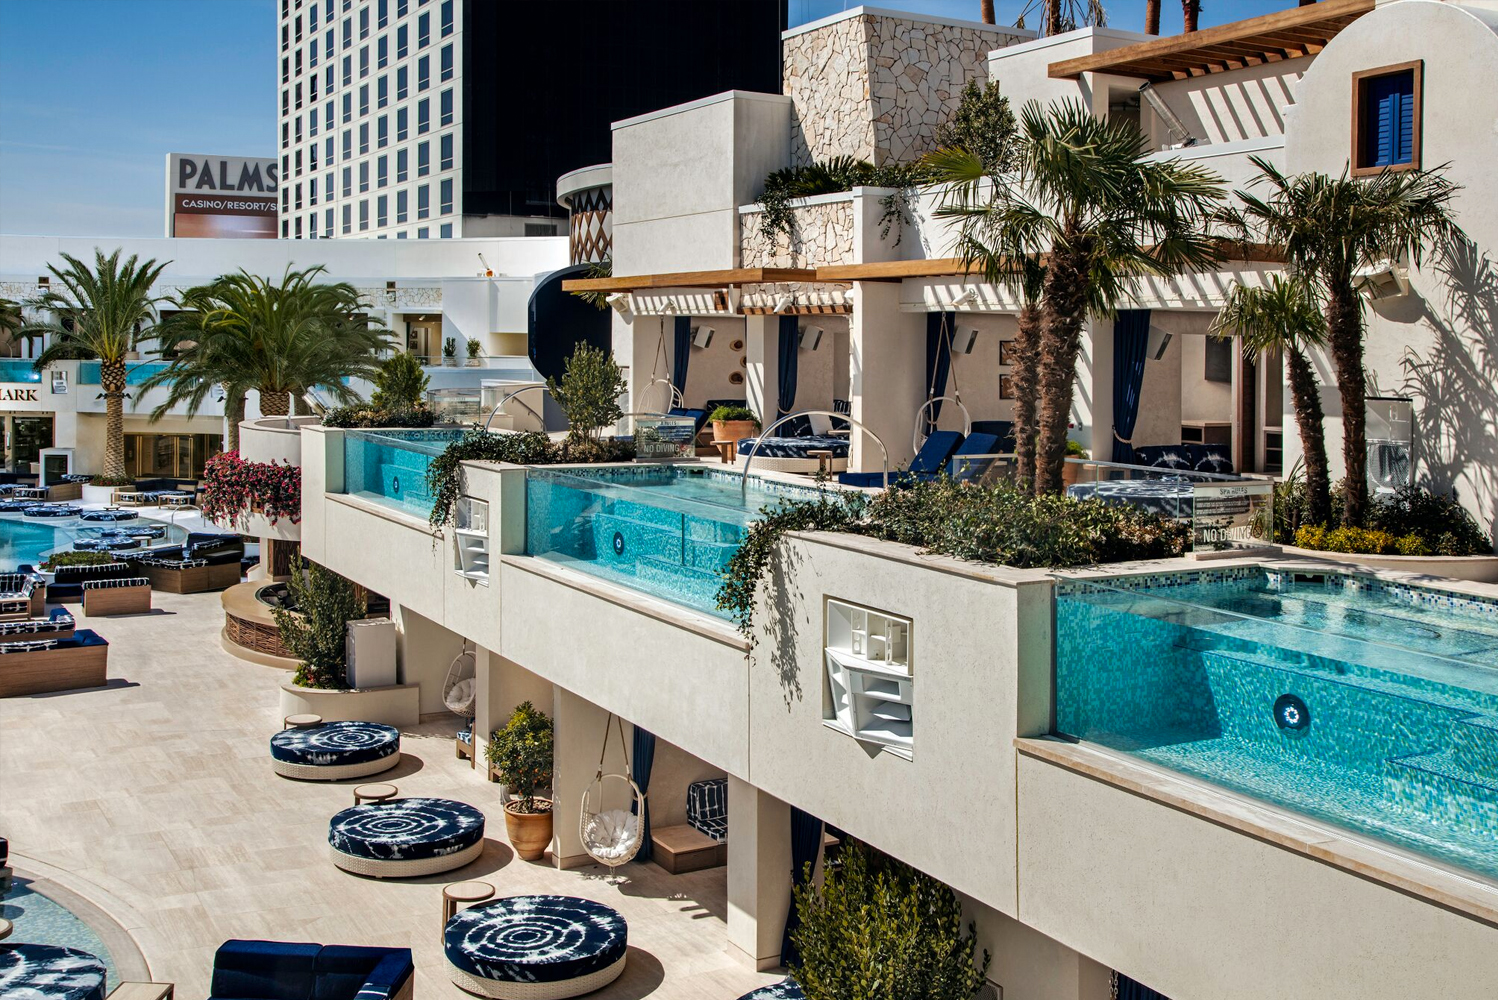 Lifescapes International completed its landscape design around the newly reimagined Palms Casino Resort in Las Vegas  a 6